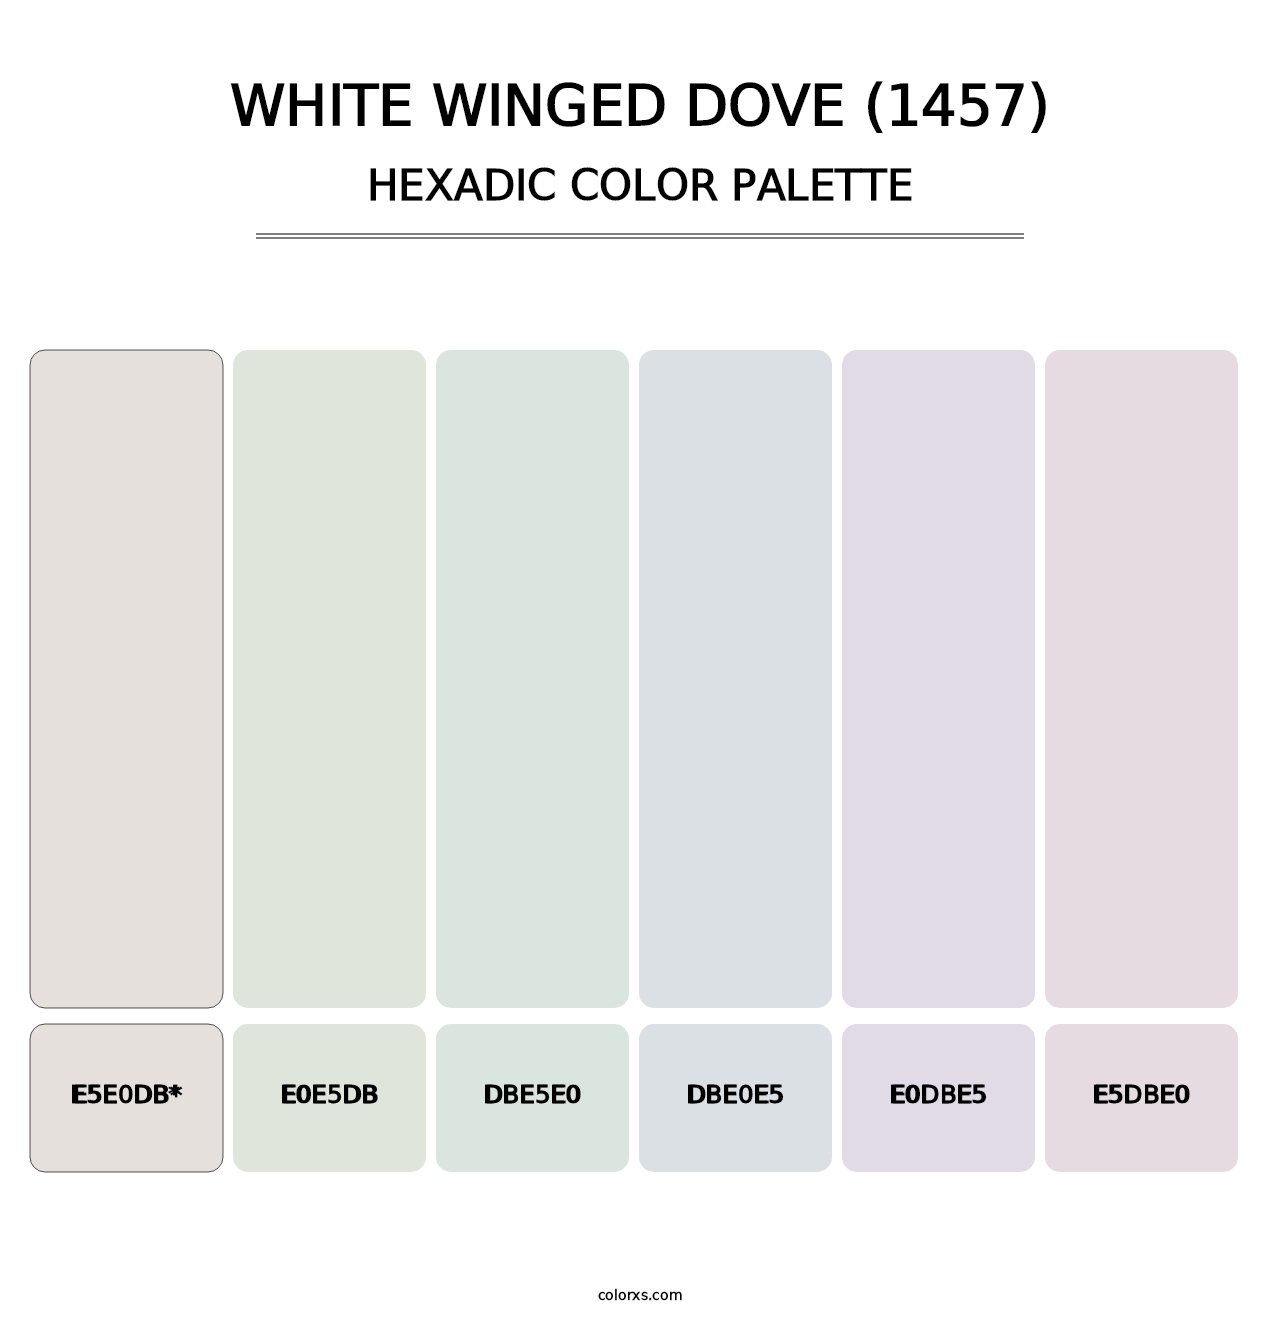 White Winged Dove (1457) - Hexadic Color Palette